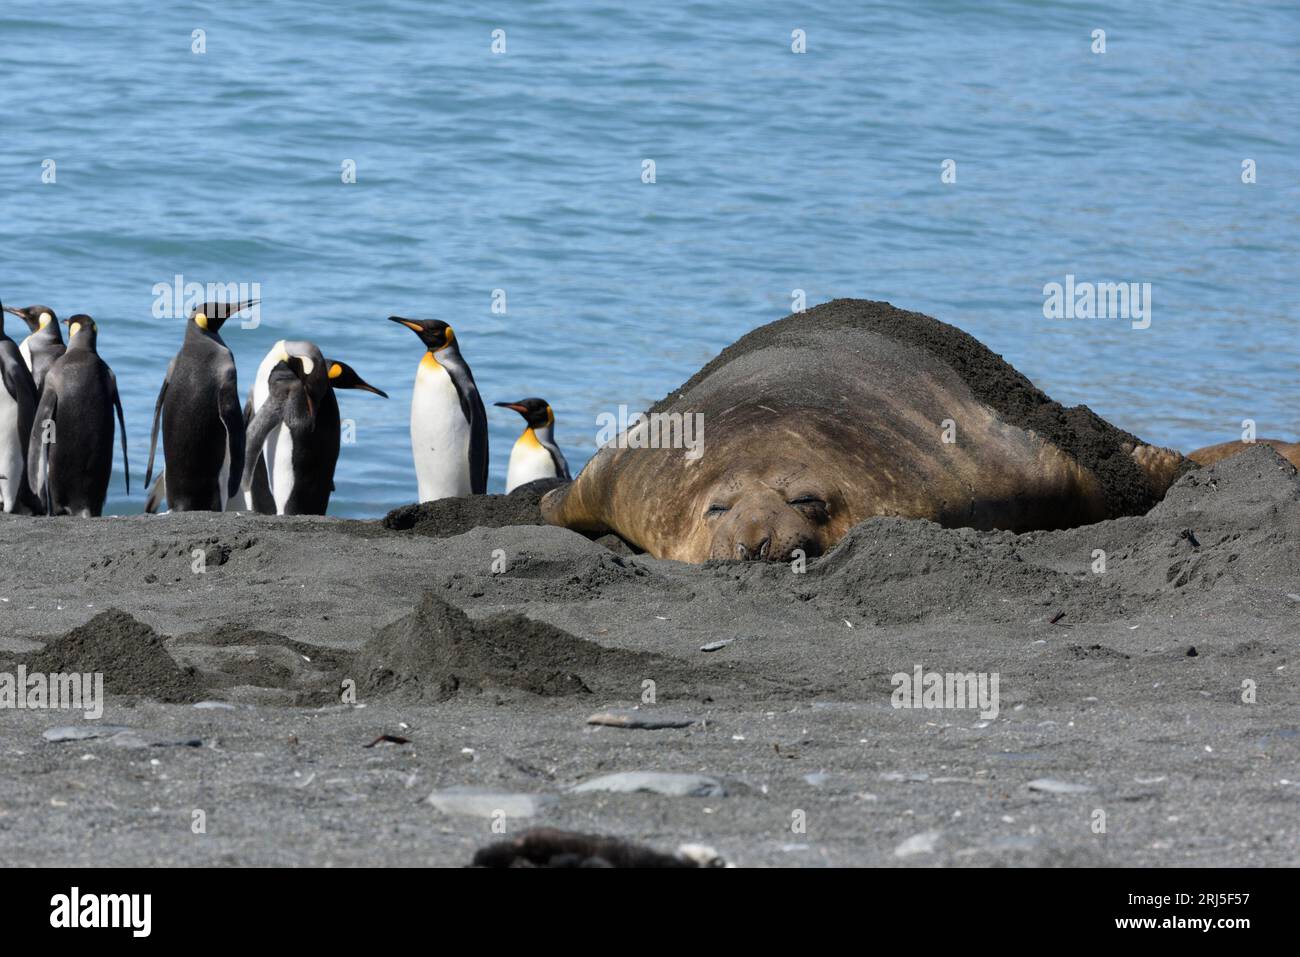 Elephant Seals lying in front of a group of King Penguins on the beach - South Georgia Island, Gold Harbour - Antarctica expedition Stock Photo